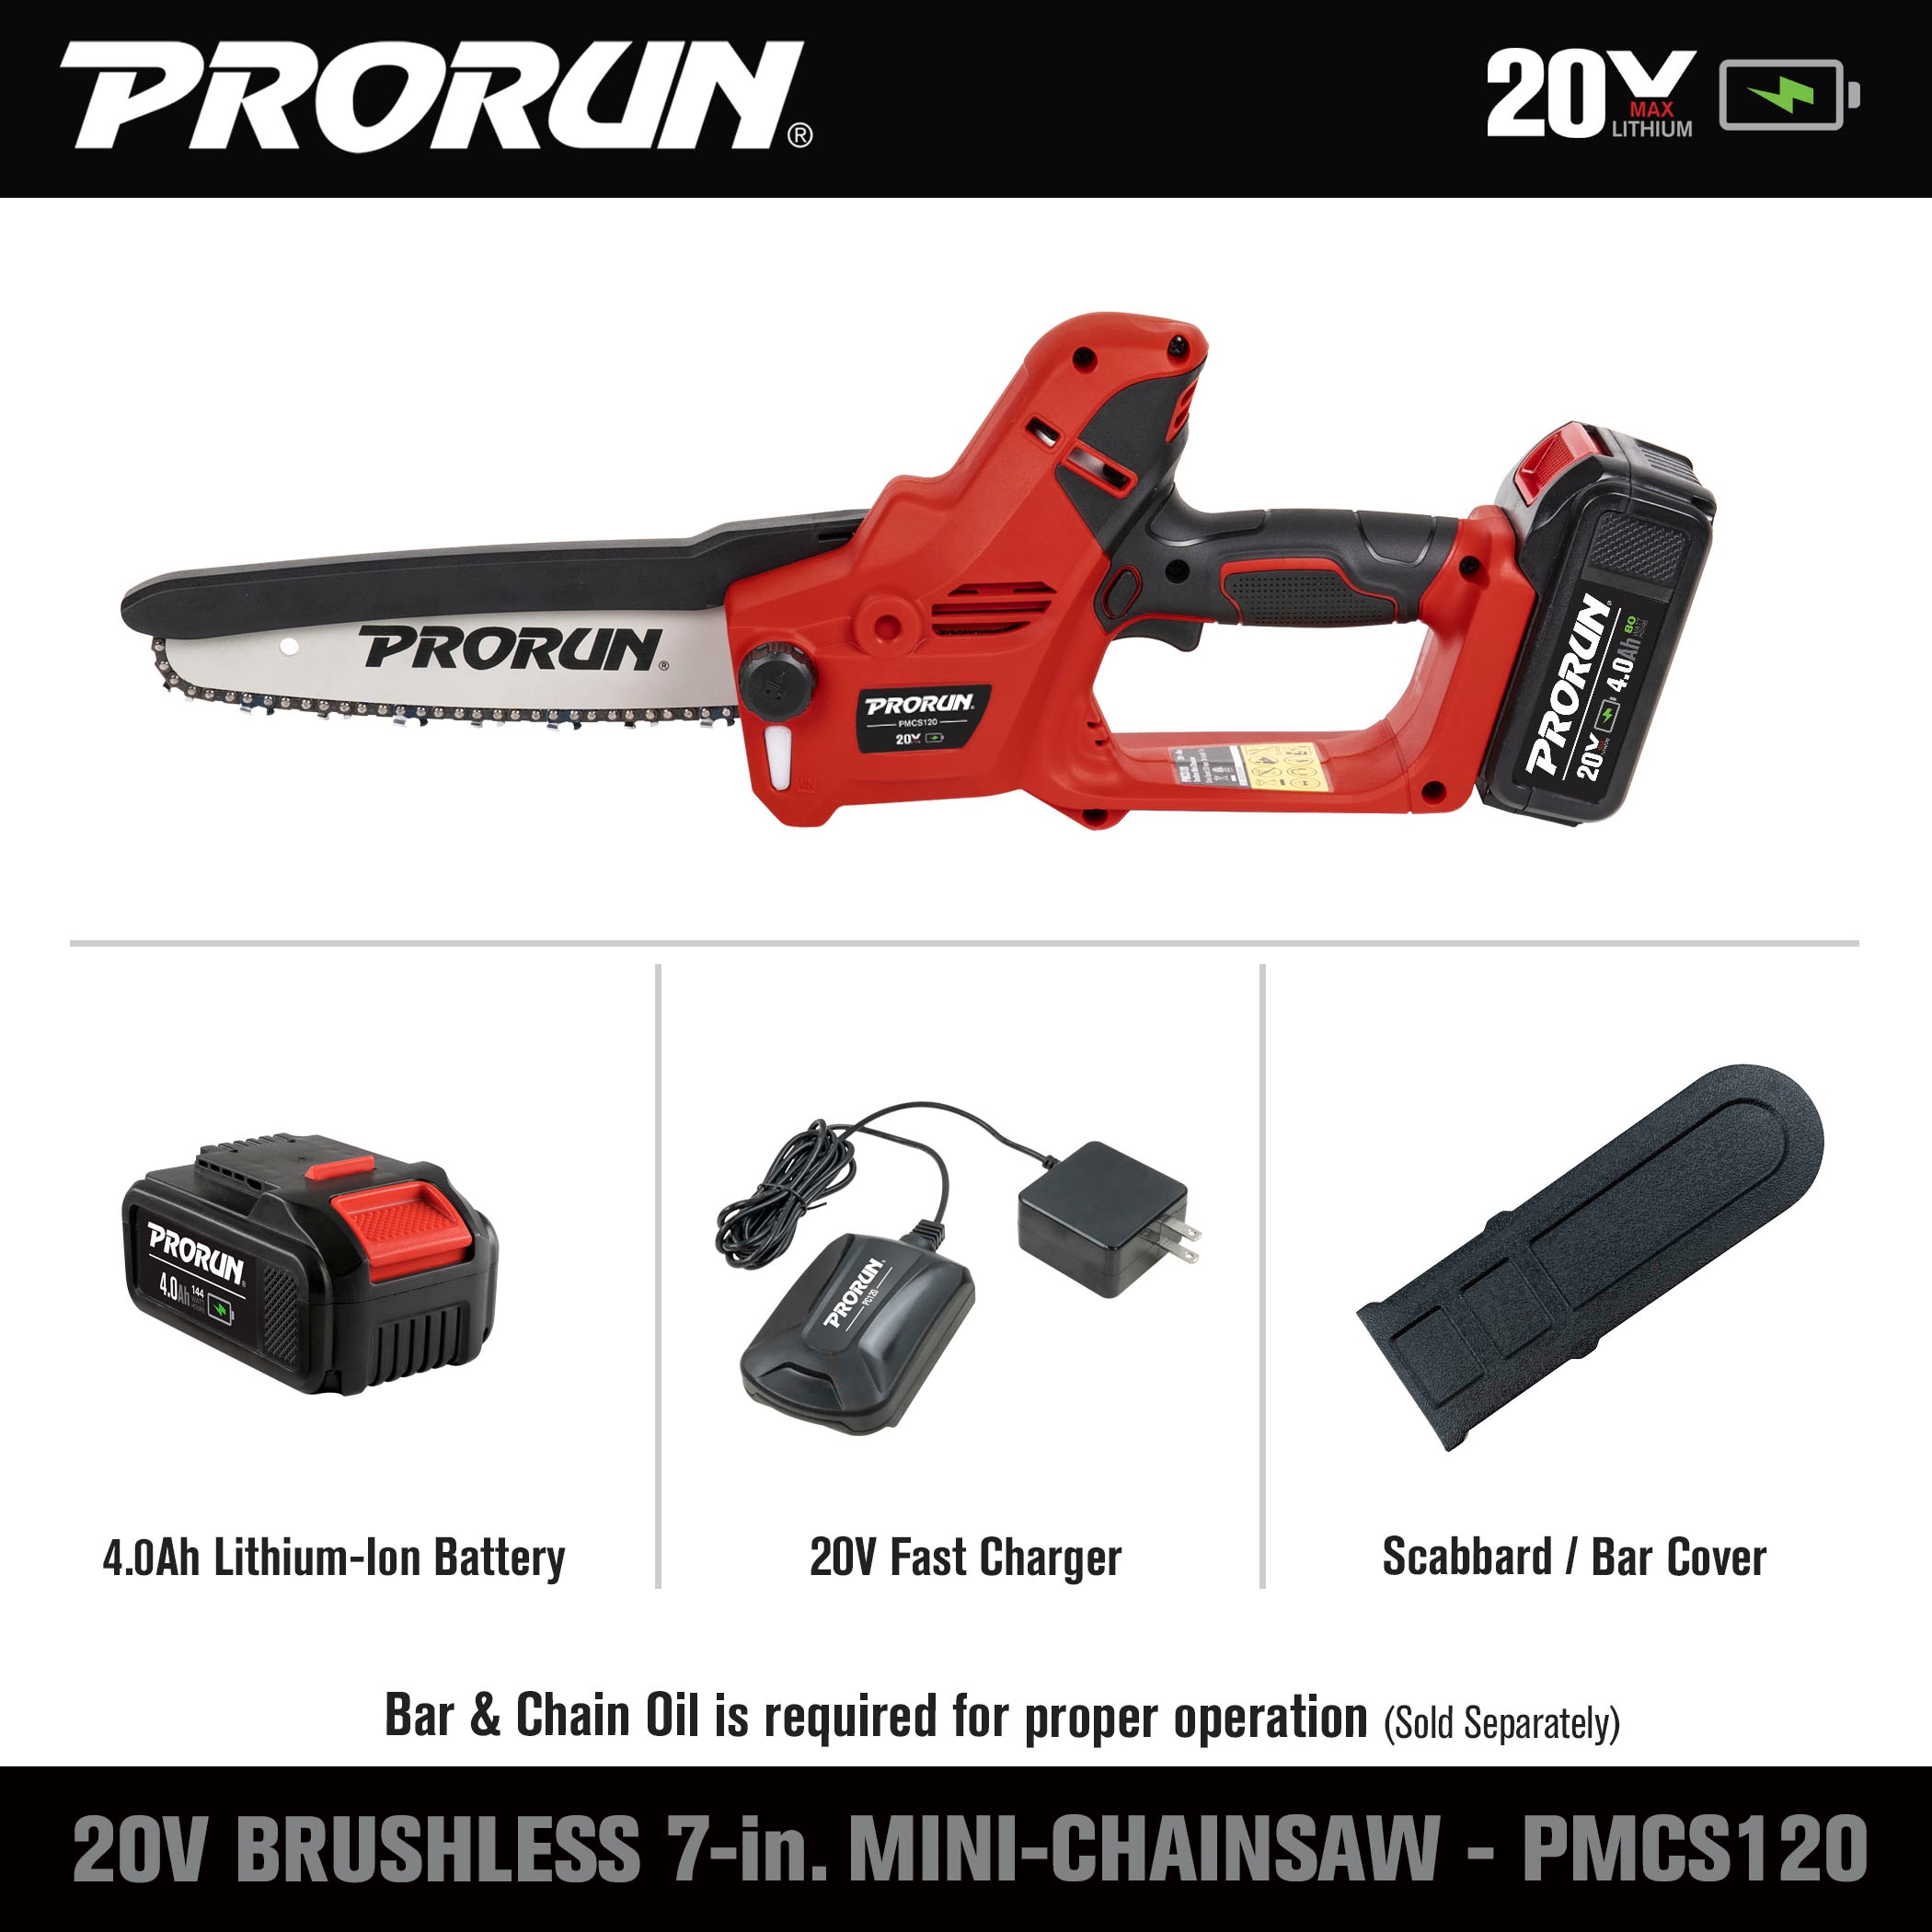 Yard Force 120v Cordless Chainsaw & One 2.5AH 120V Battery With Charger